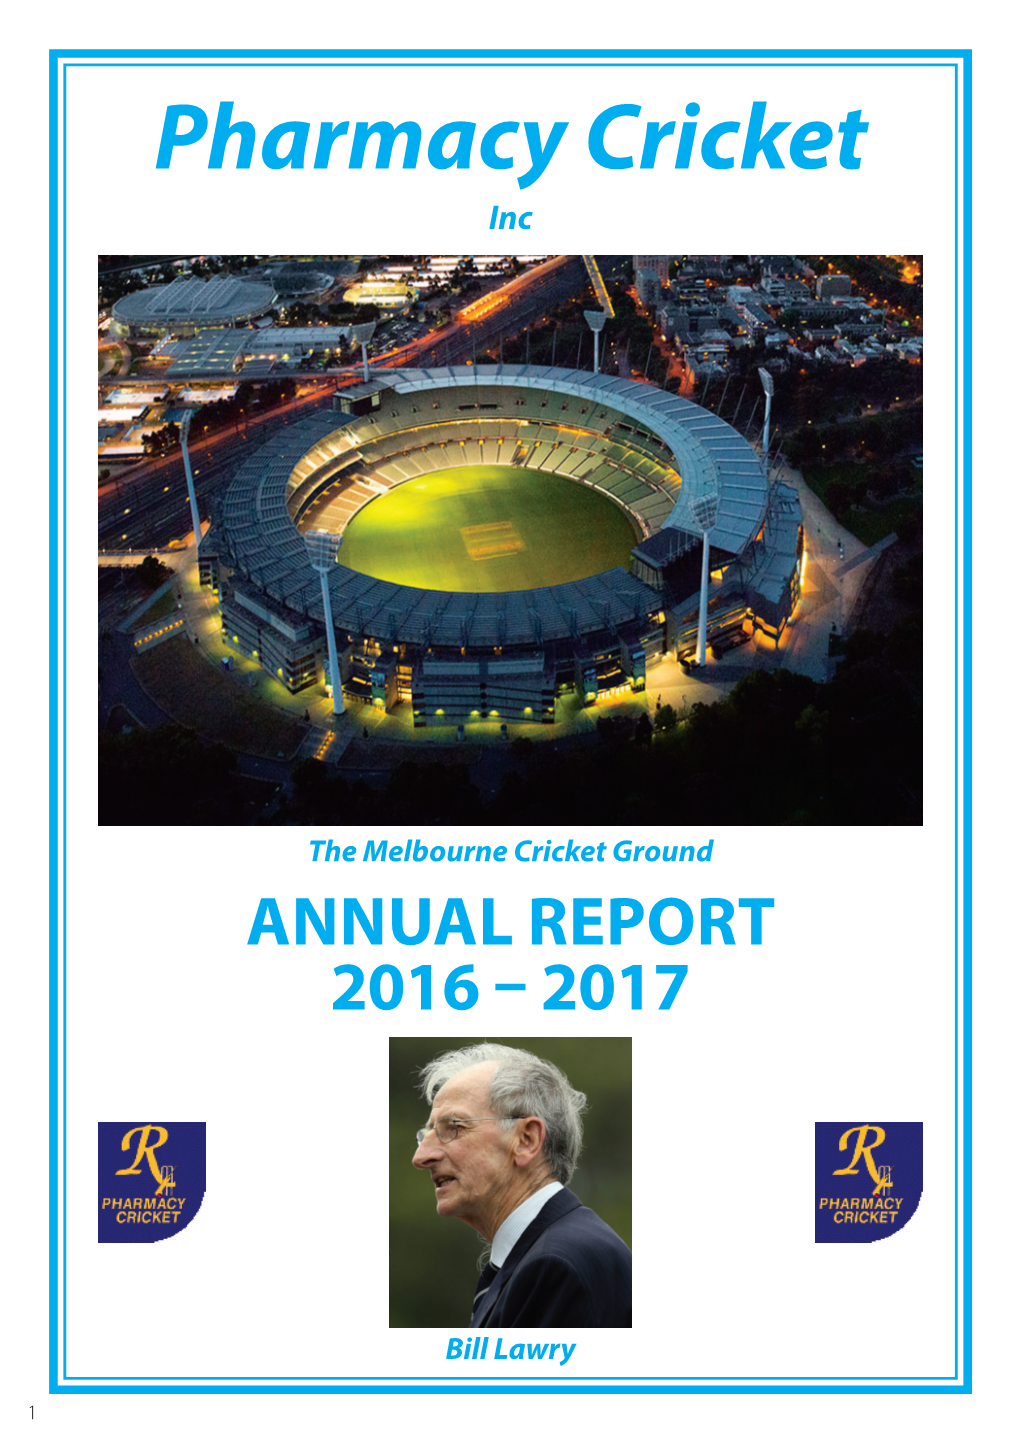 Pharmacy Cricket Annual Report 2016